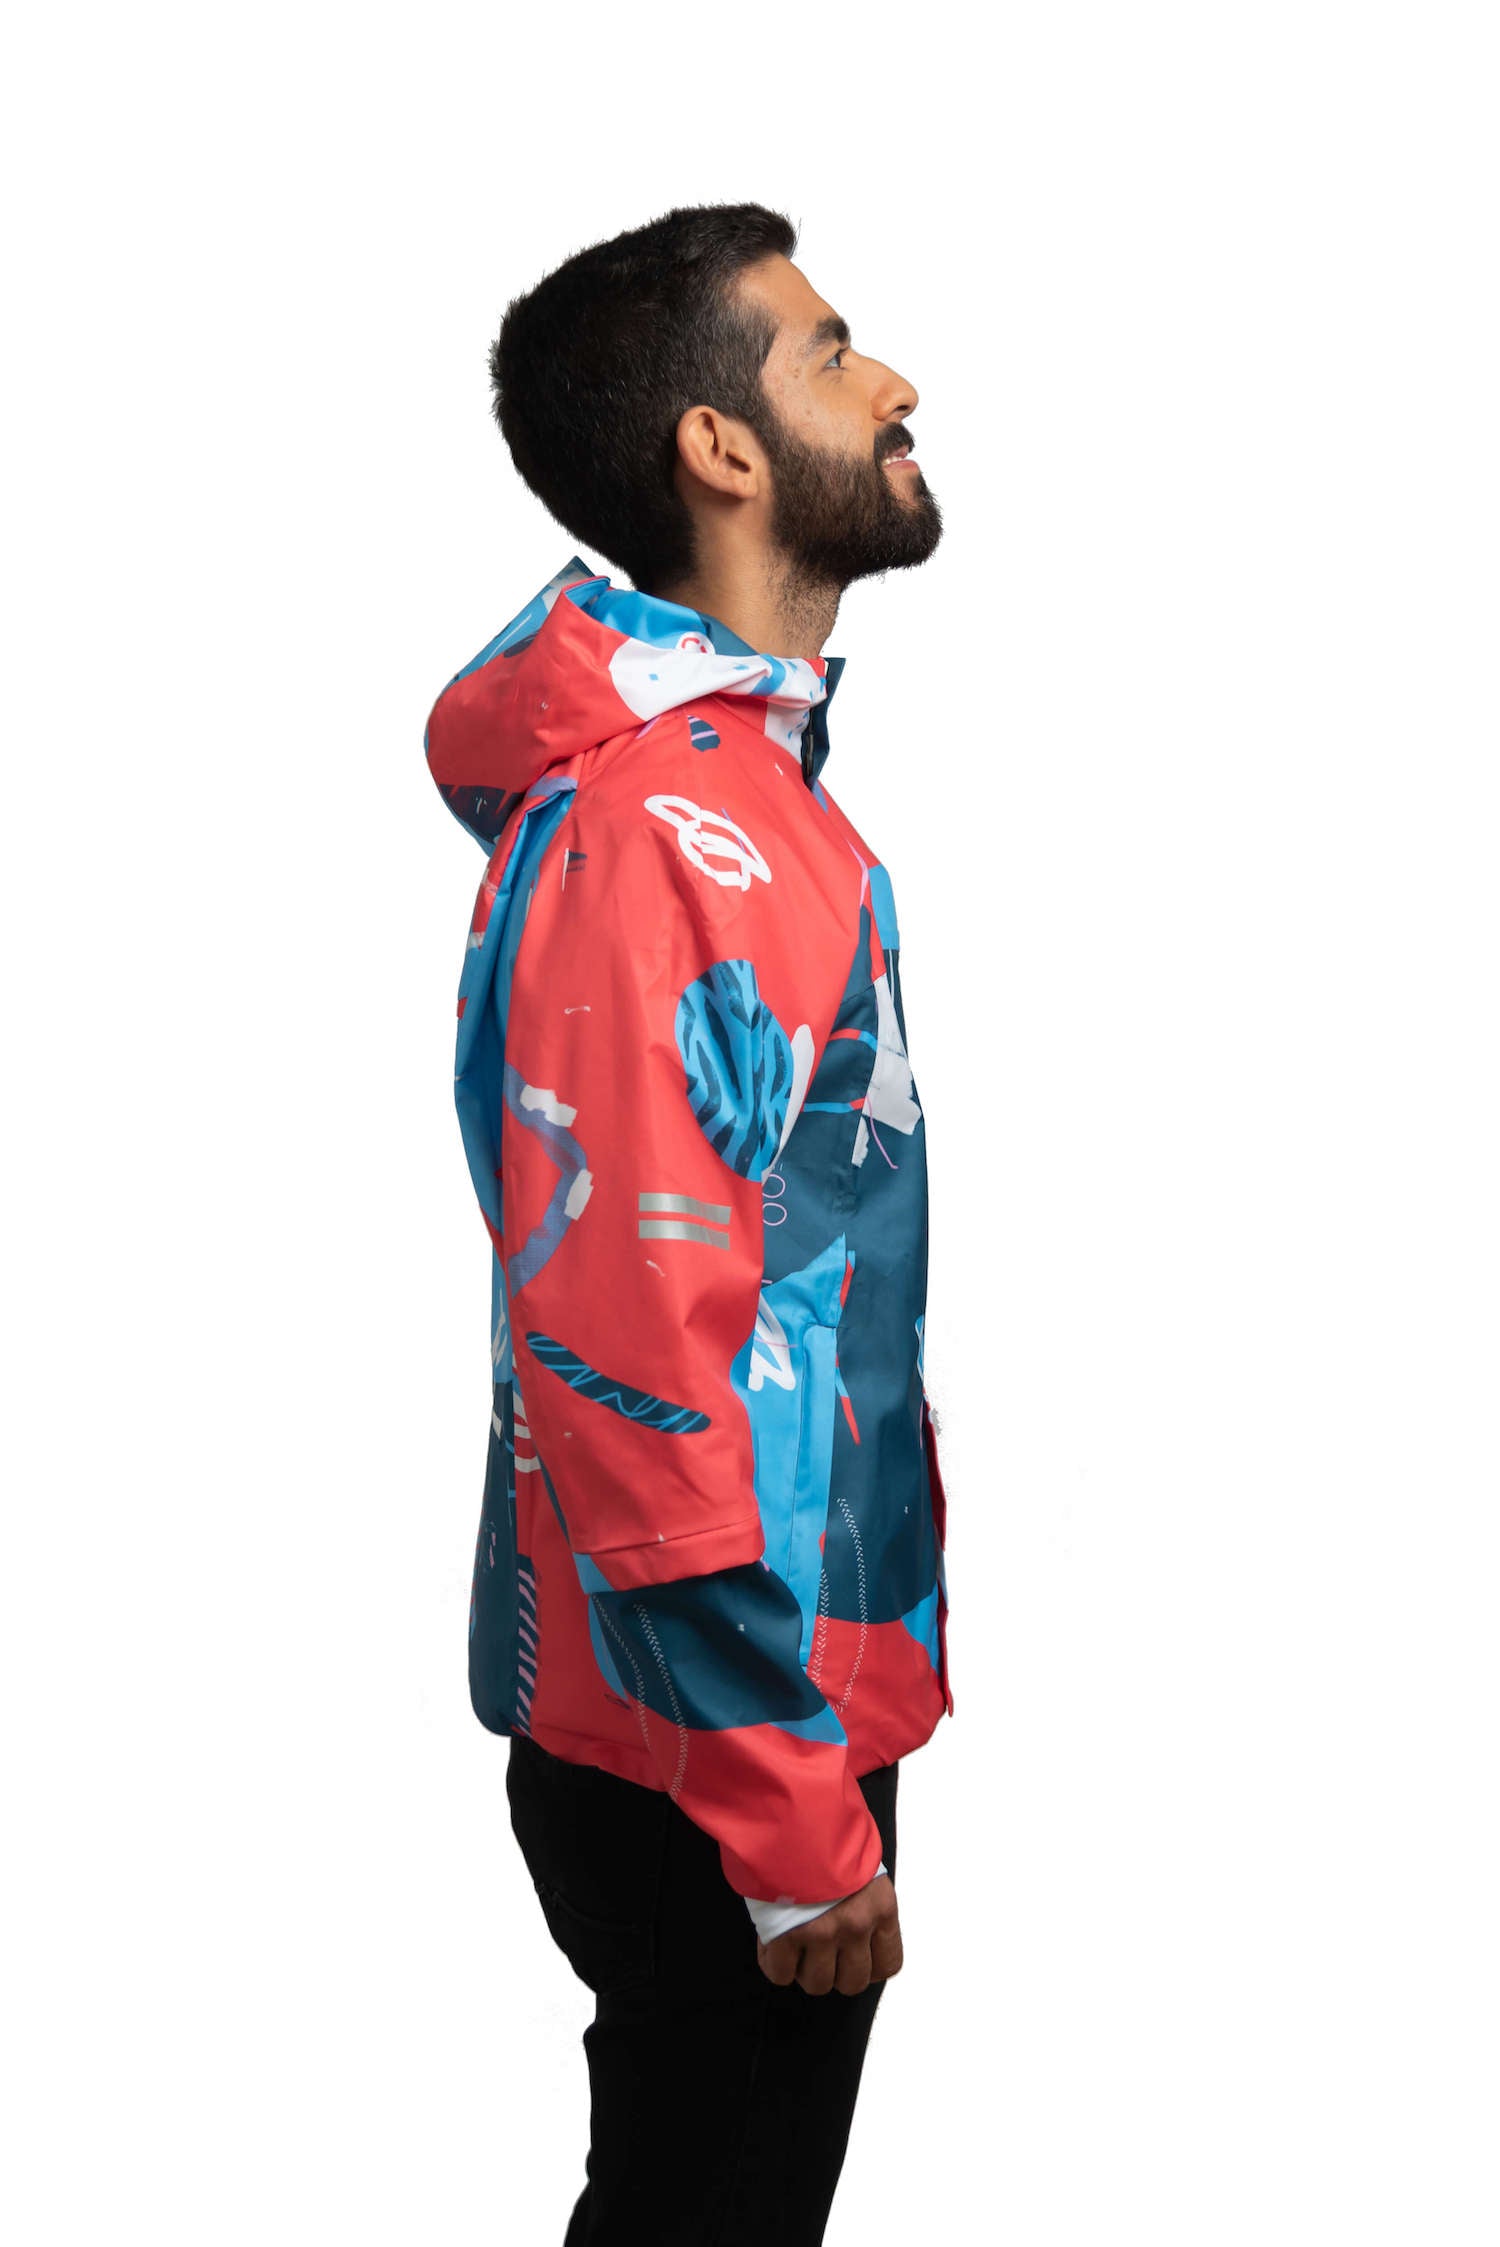 Eco friendly Rainjacket for Cyclists - Blue and Red Graphic Print - Modern Stylish Cycling Wear for Men and Women - Unisex and Environmentally Friendly